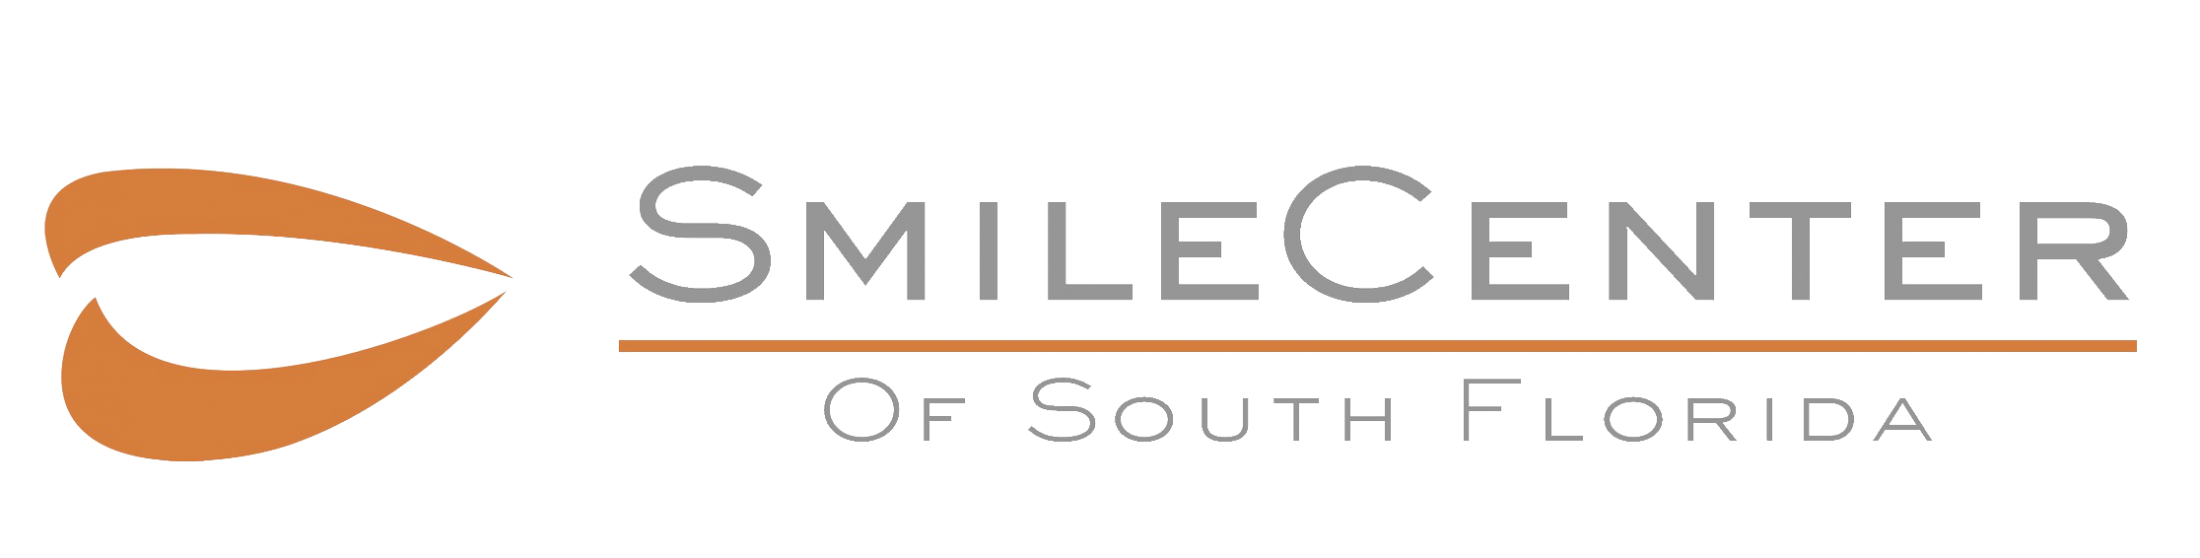 Link to Smile Center of South Florida home page